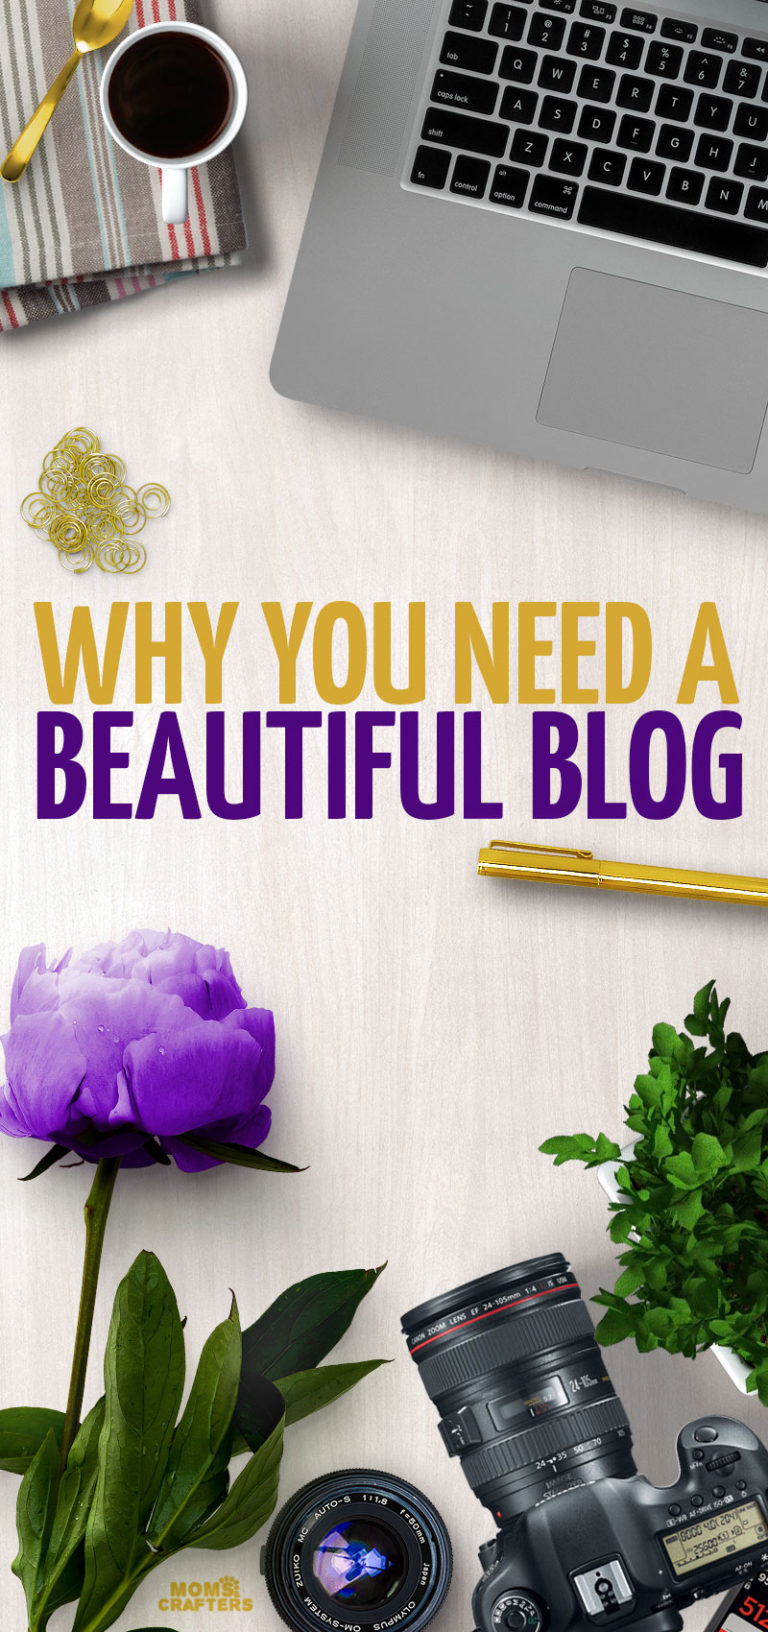 Why You Need a Beautiful Blog